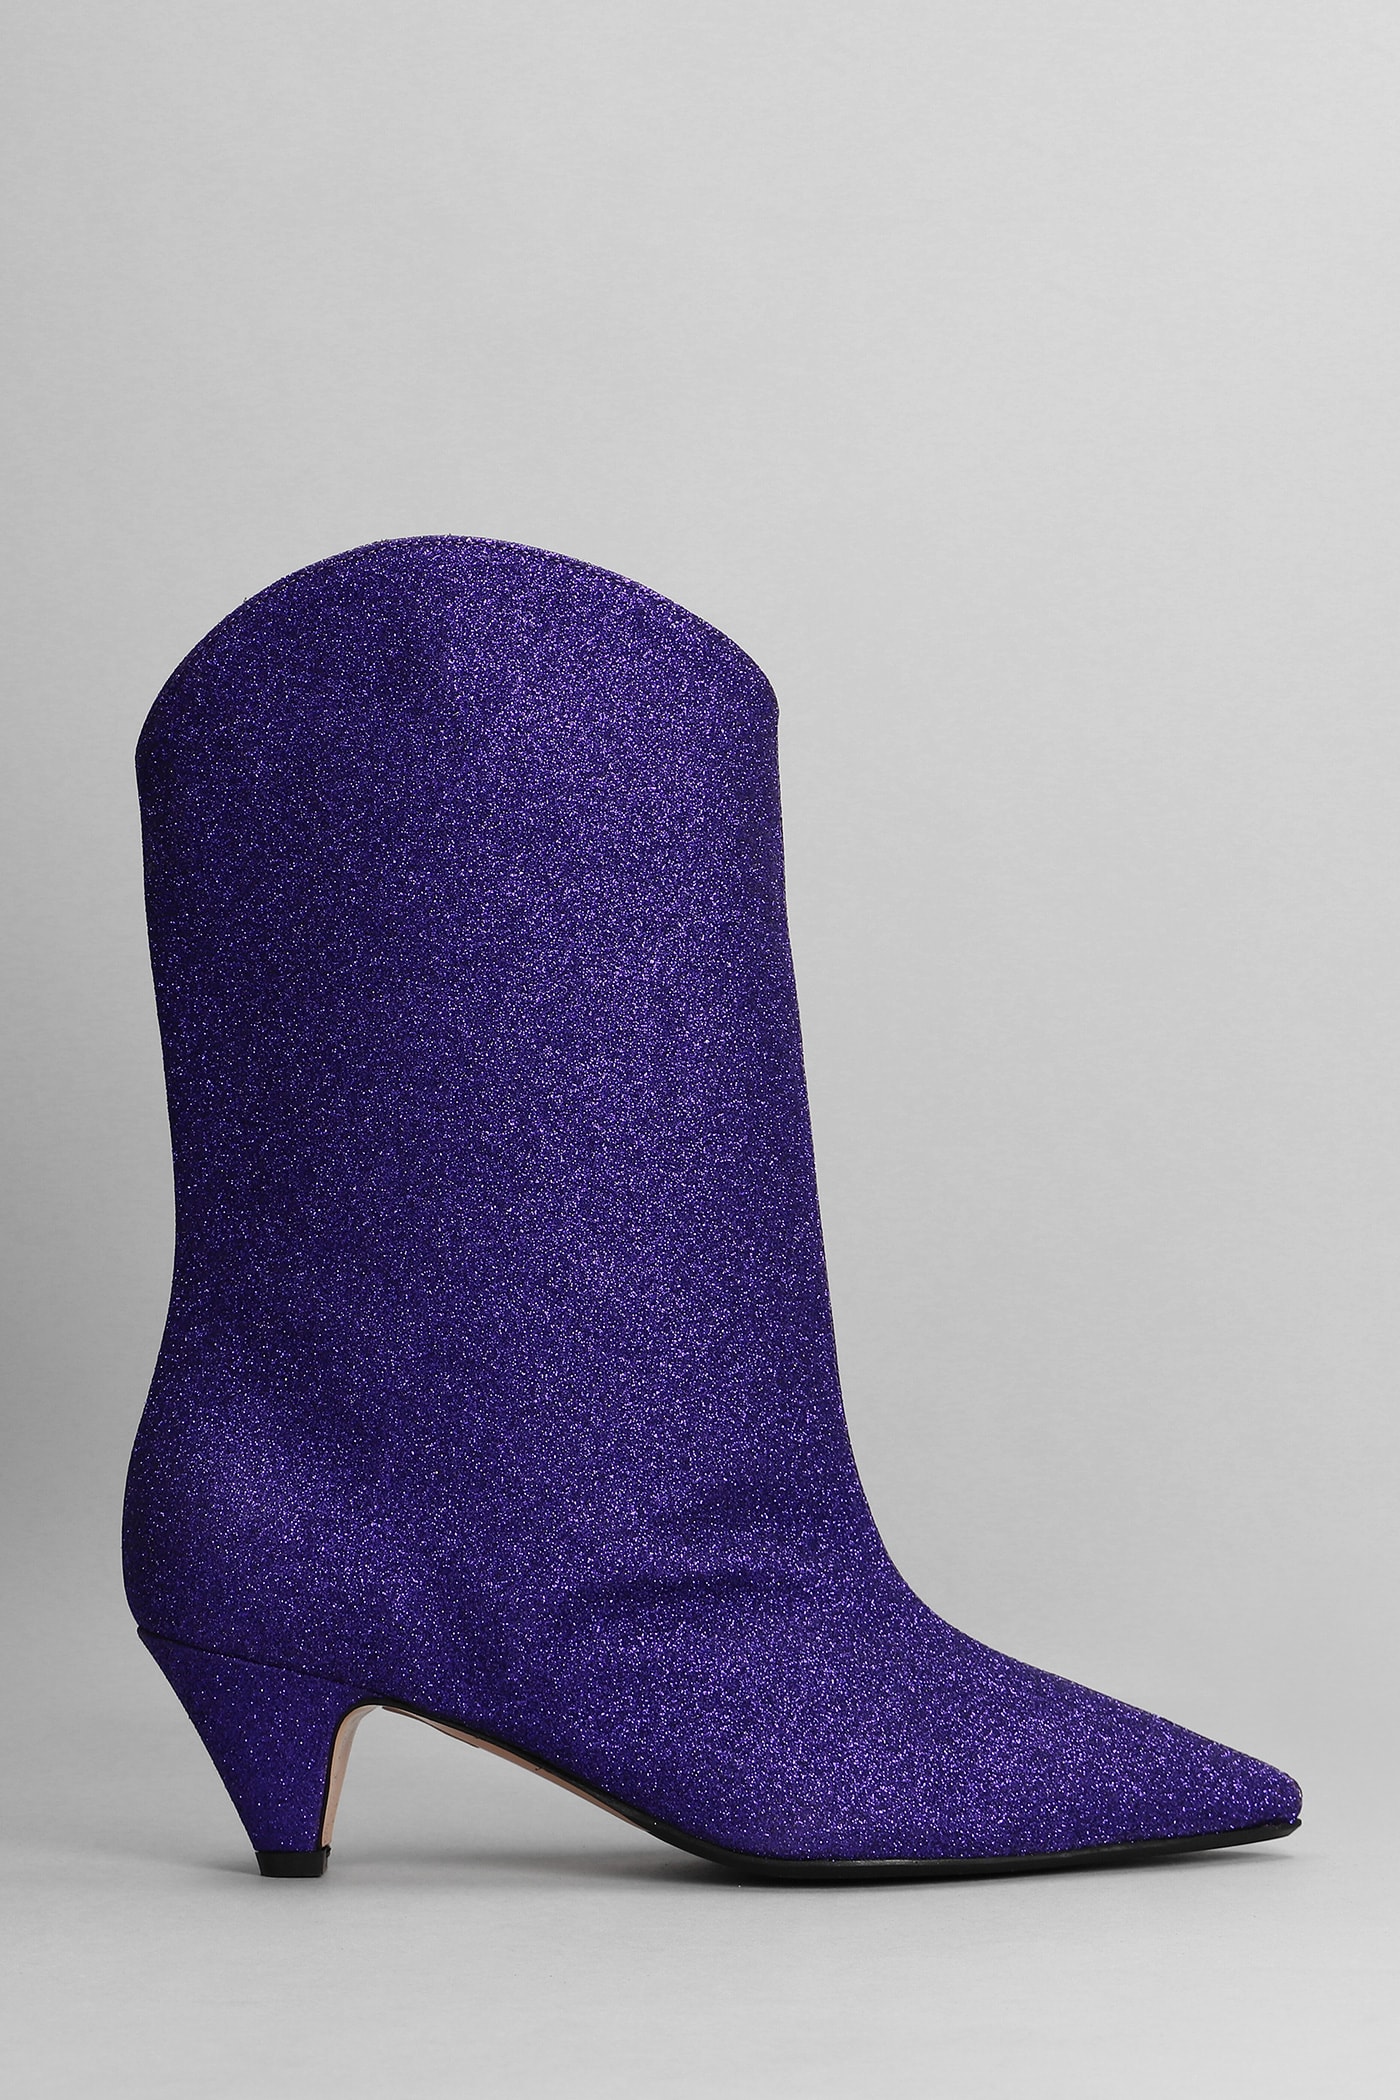 Anna F. High Heels Ankle Boots In Viola Glitter